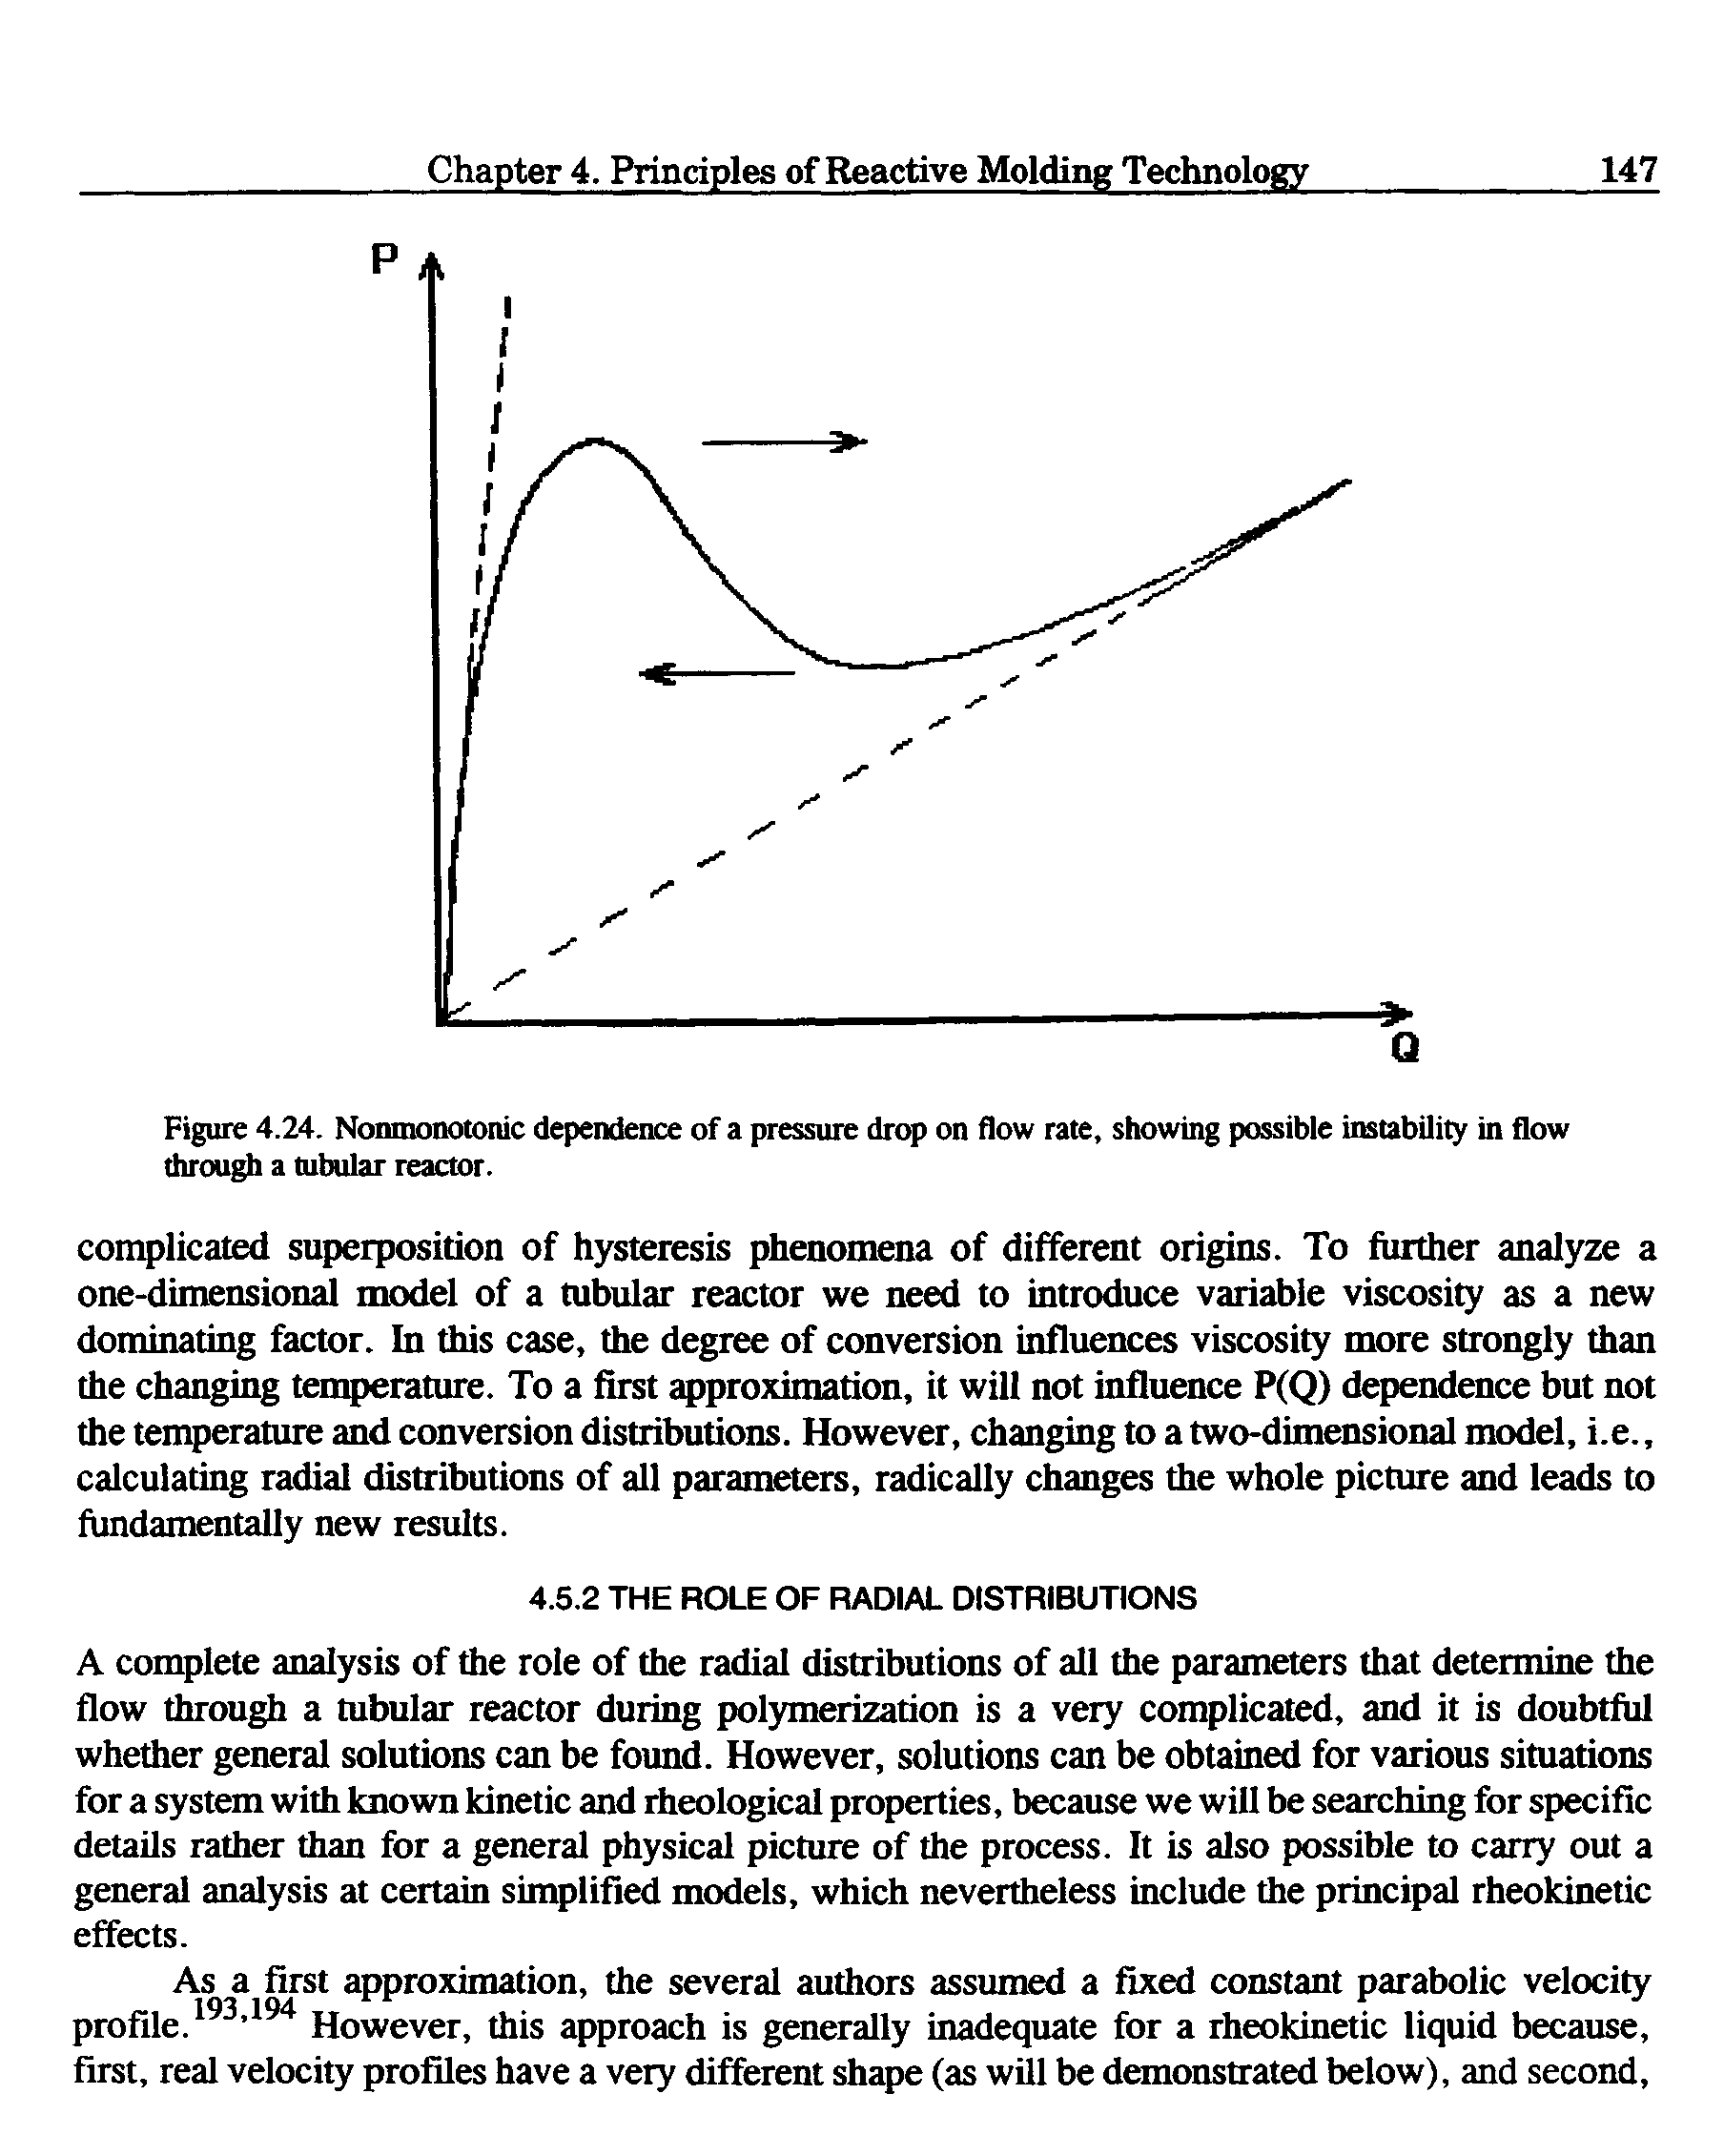 Figure 4.24. Nonmonotonic dependence of a pressure drop on flow rate, showing possible instability in flow through a tubular reactor.